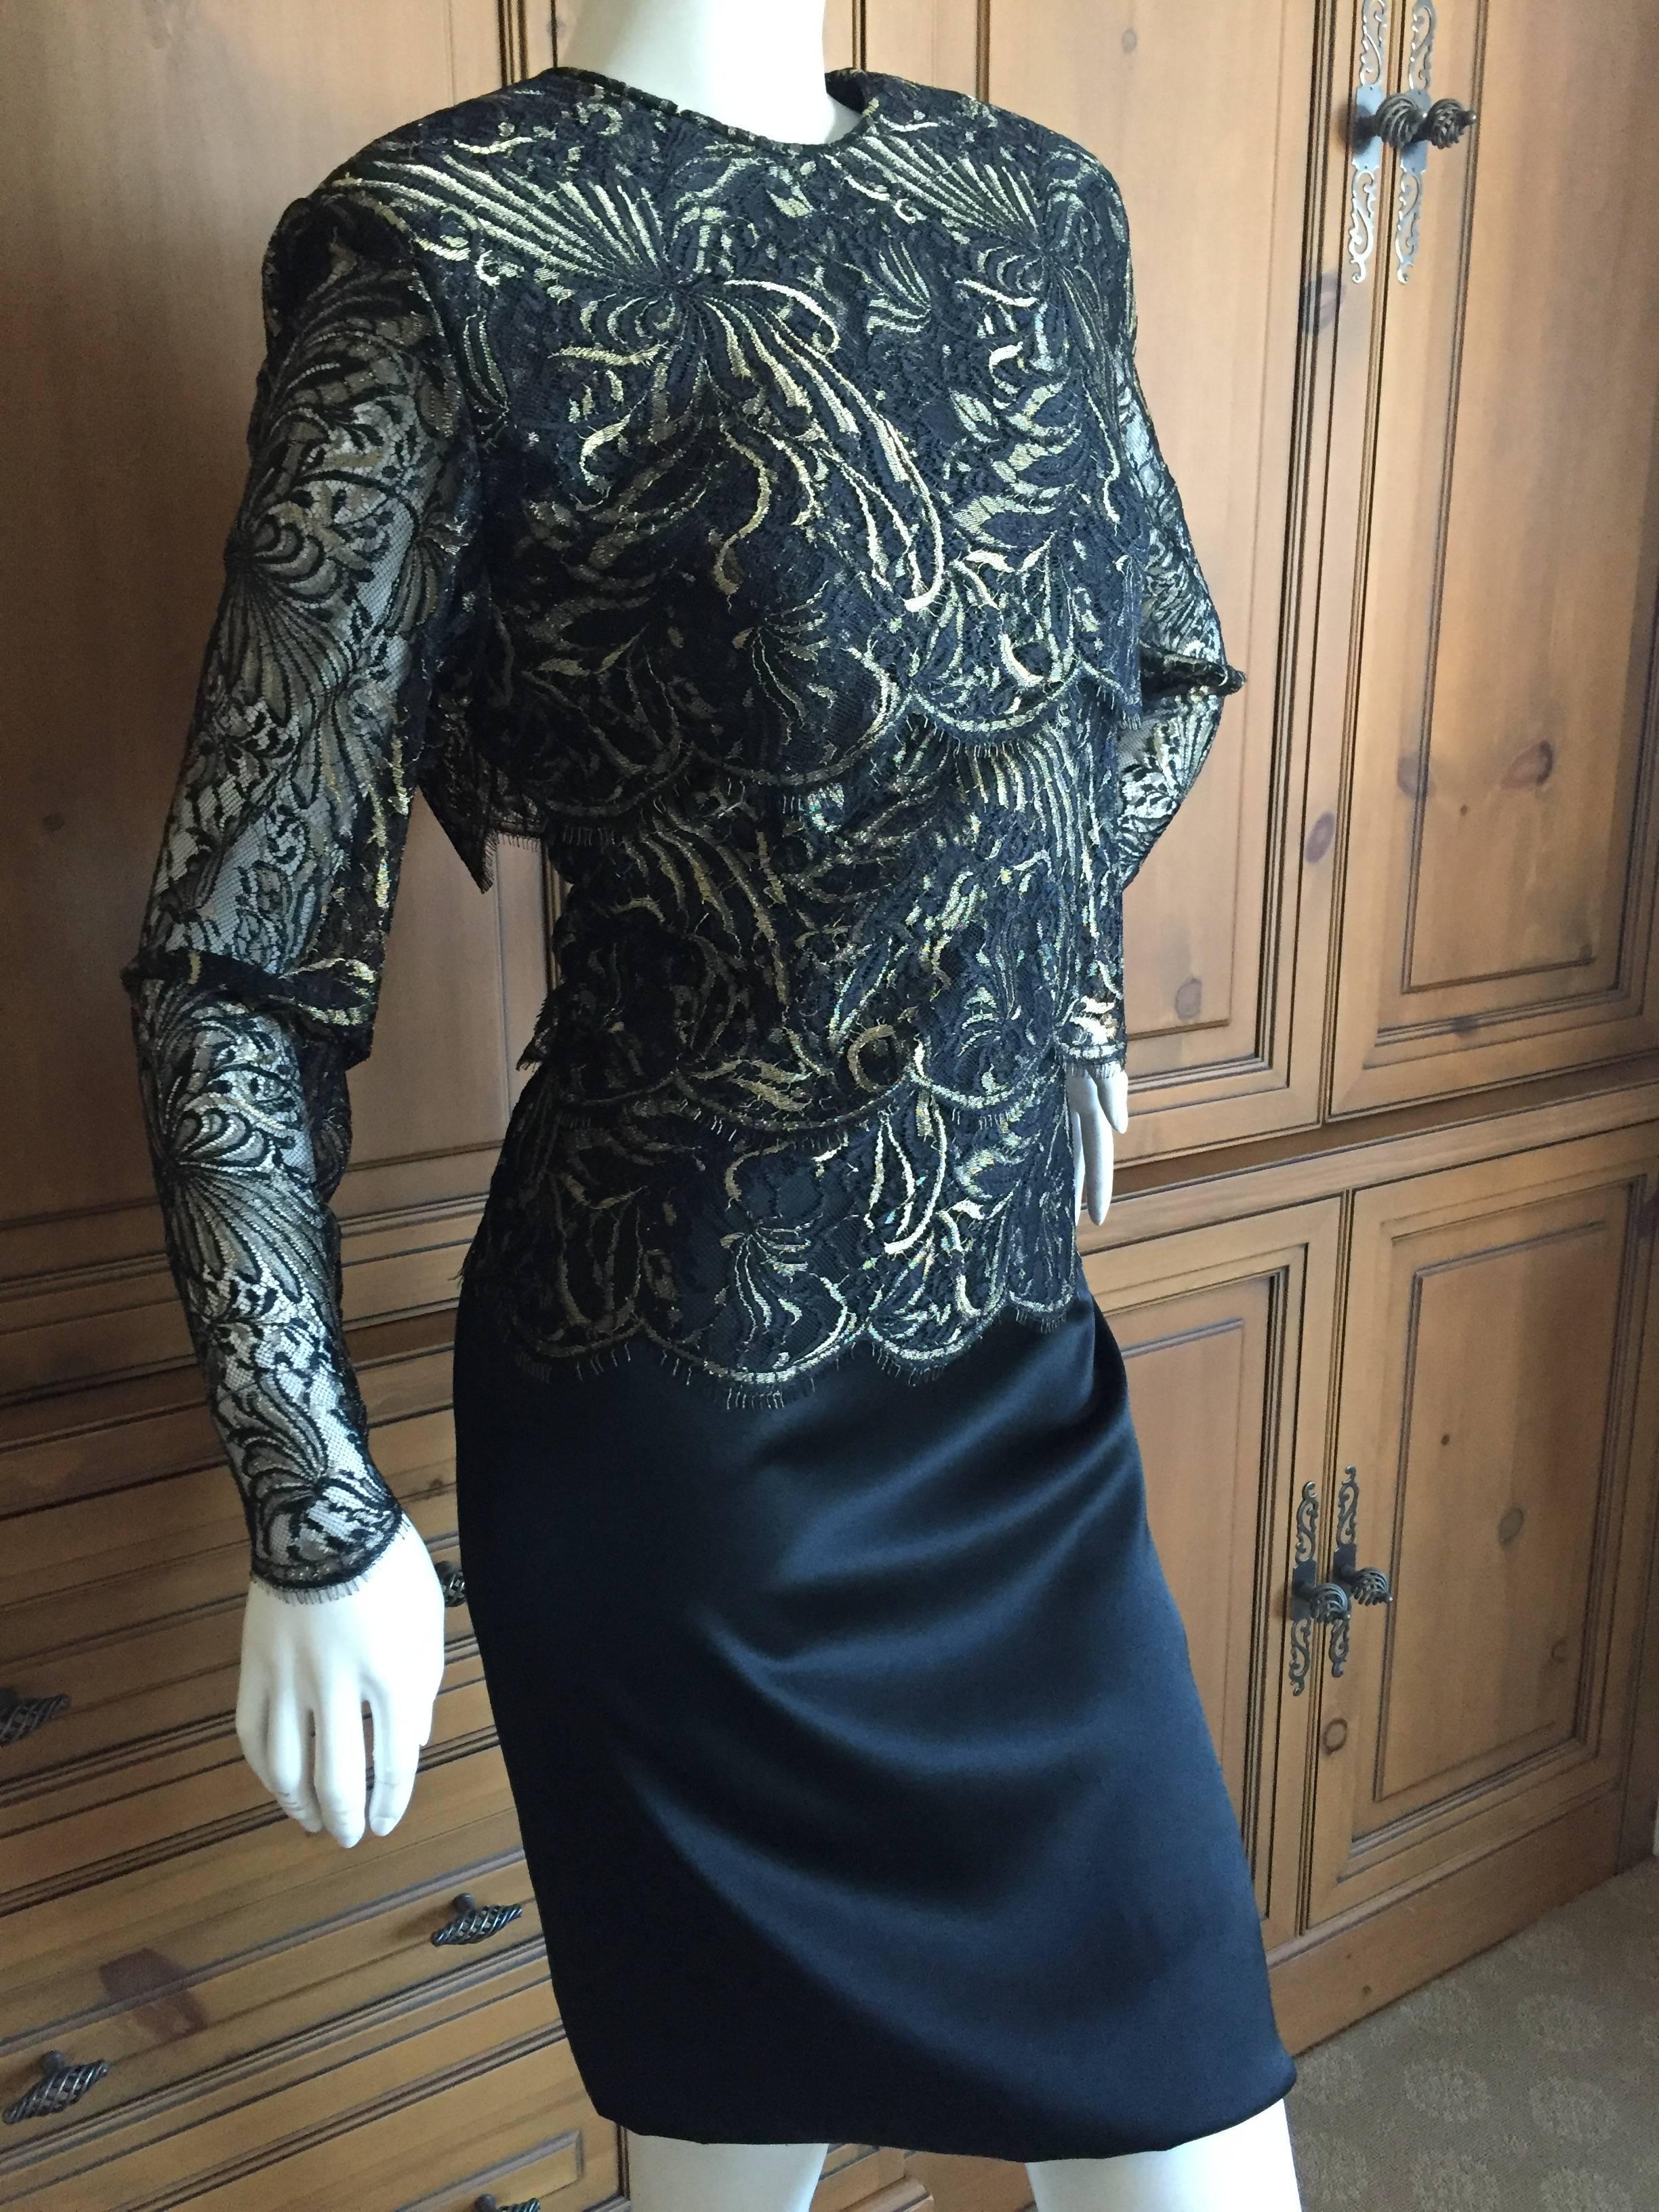 Galanos Tiered Lace Dress with Gold Accents In Excellent Condition For Sale In Cloverdale, CA